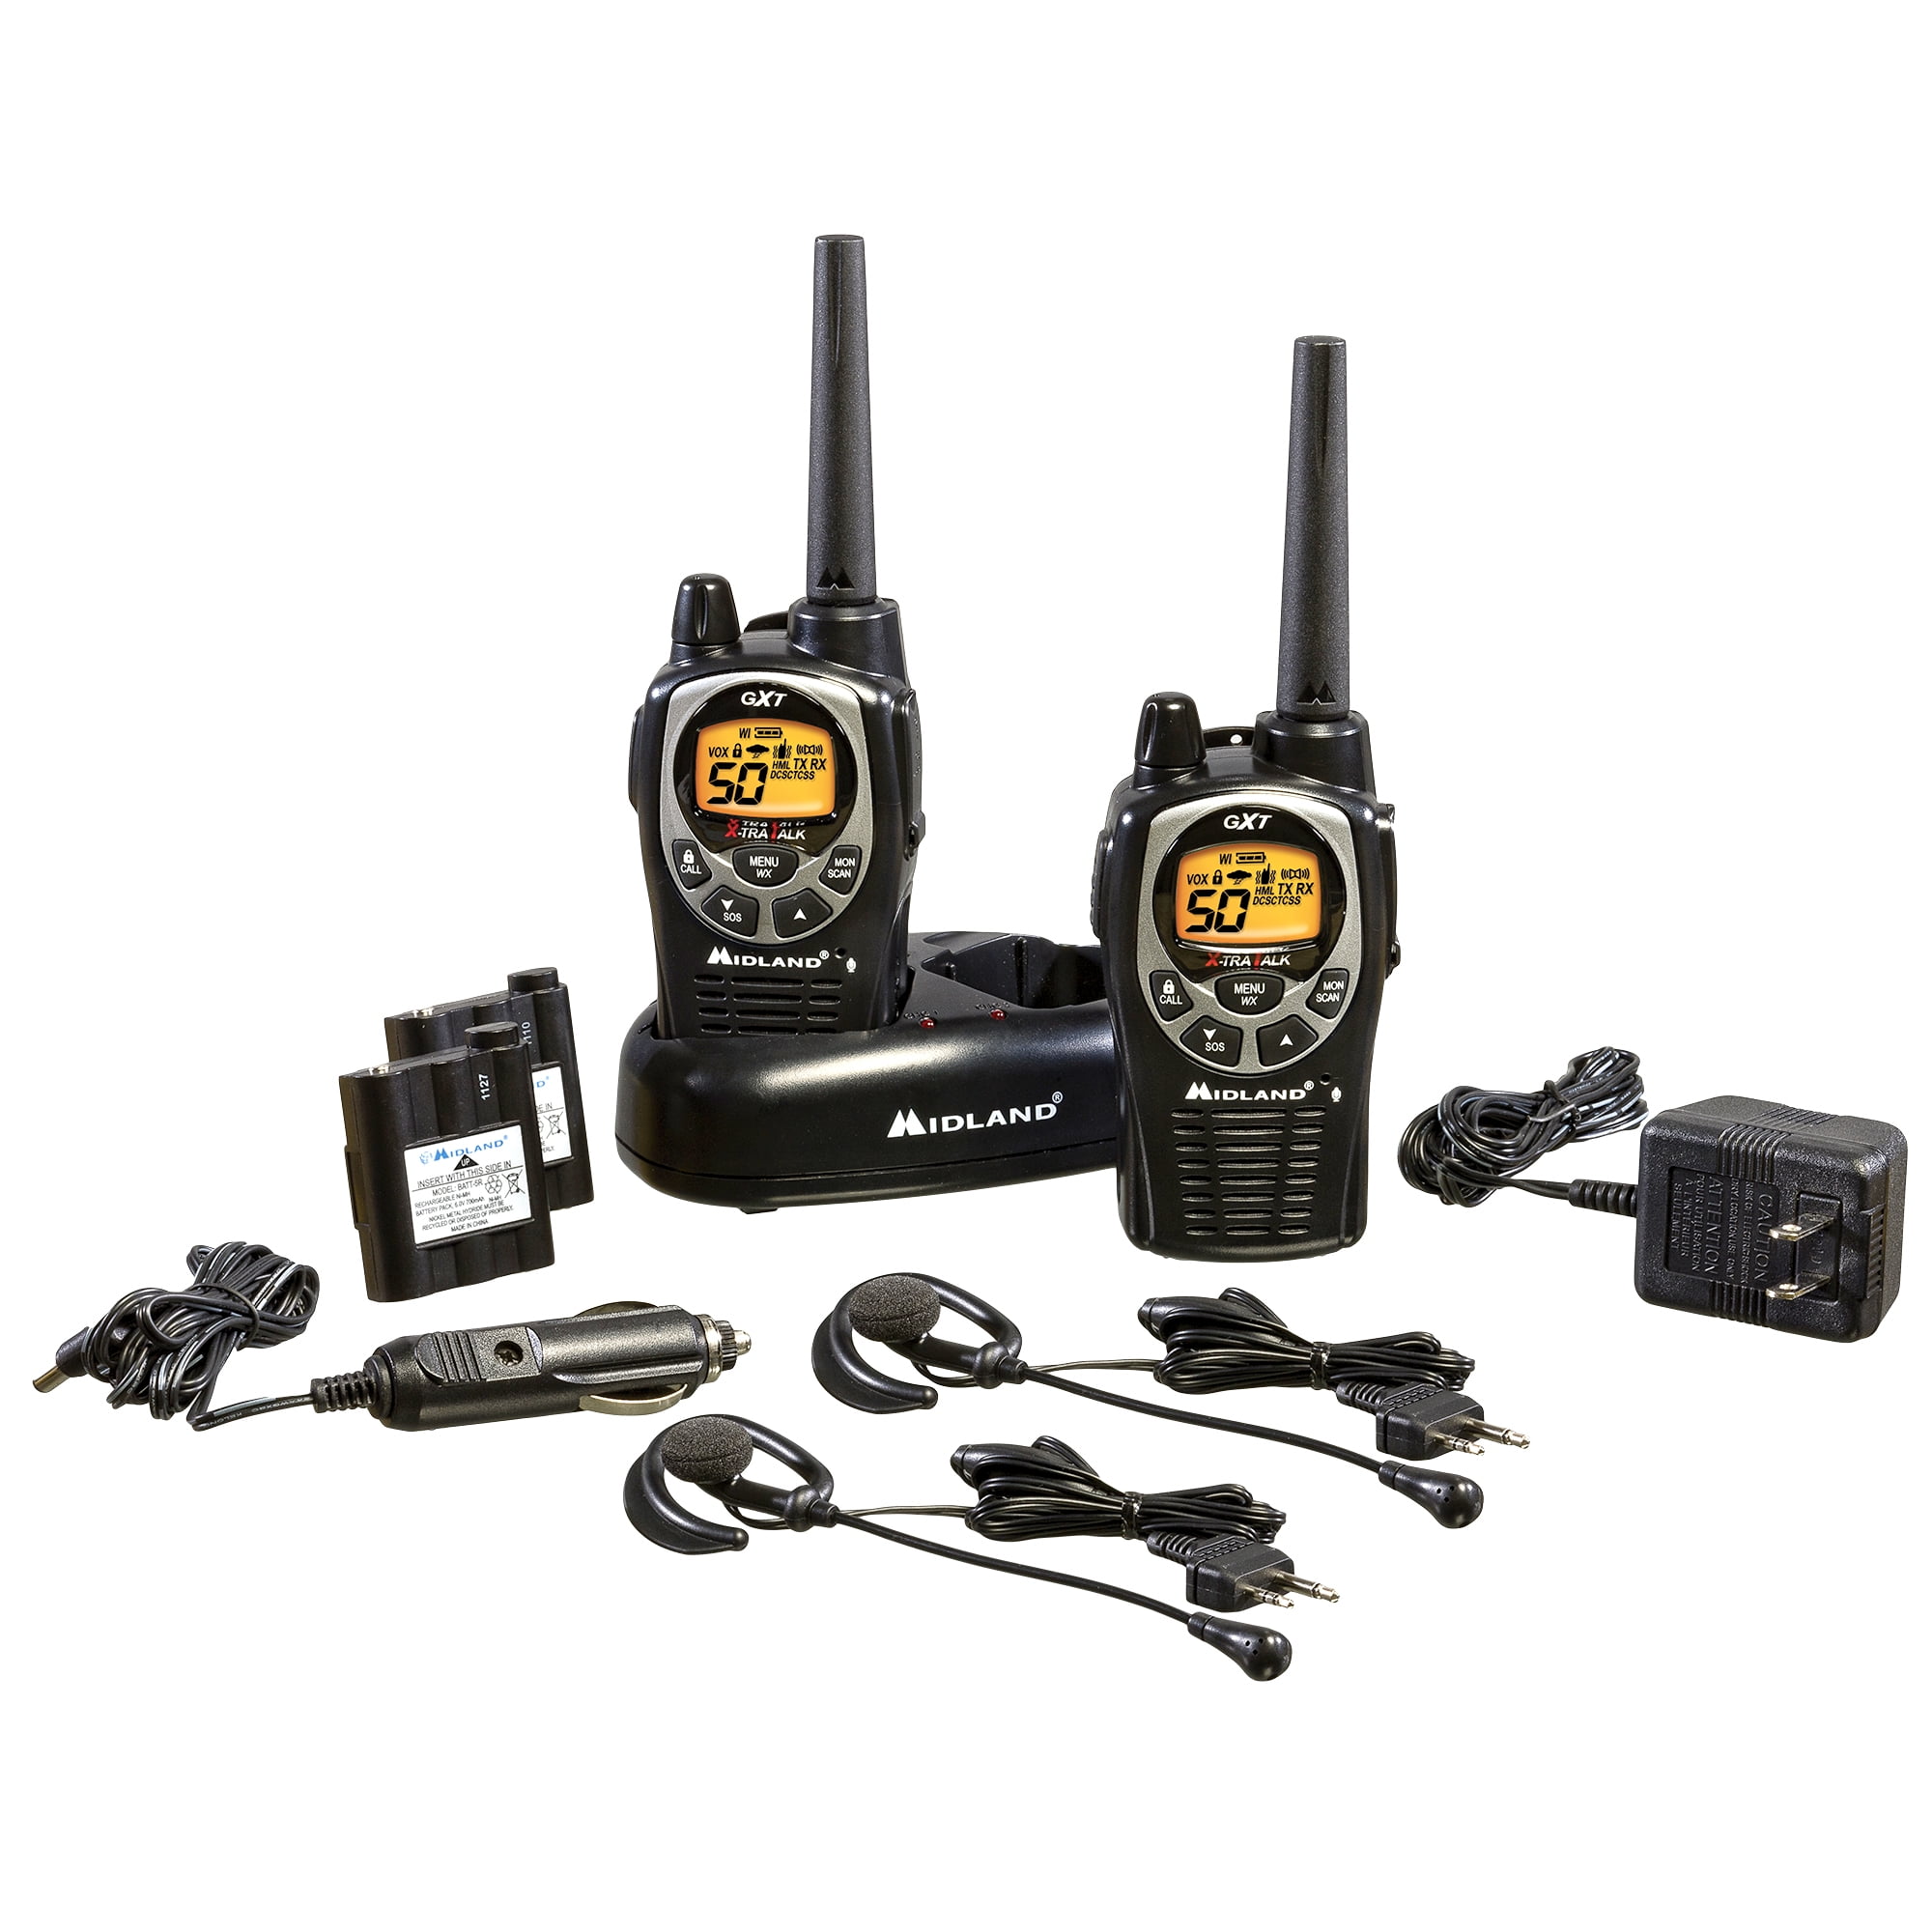 Audiovox GMRS1535 5-Mile 15-Channel FRS/GMRS Two-Way Radio ABCD frs; 2way; two way; family; radio;